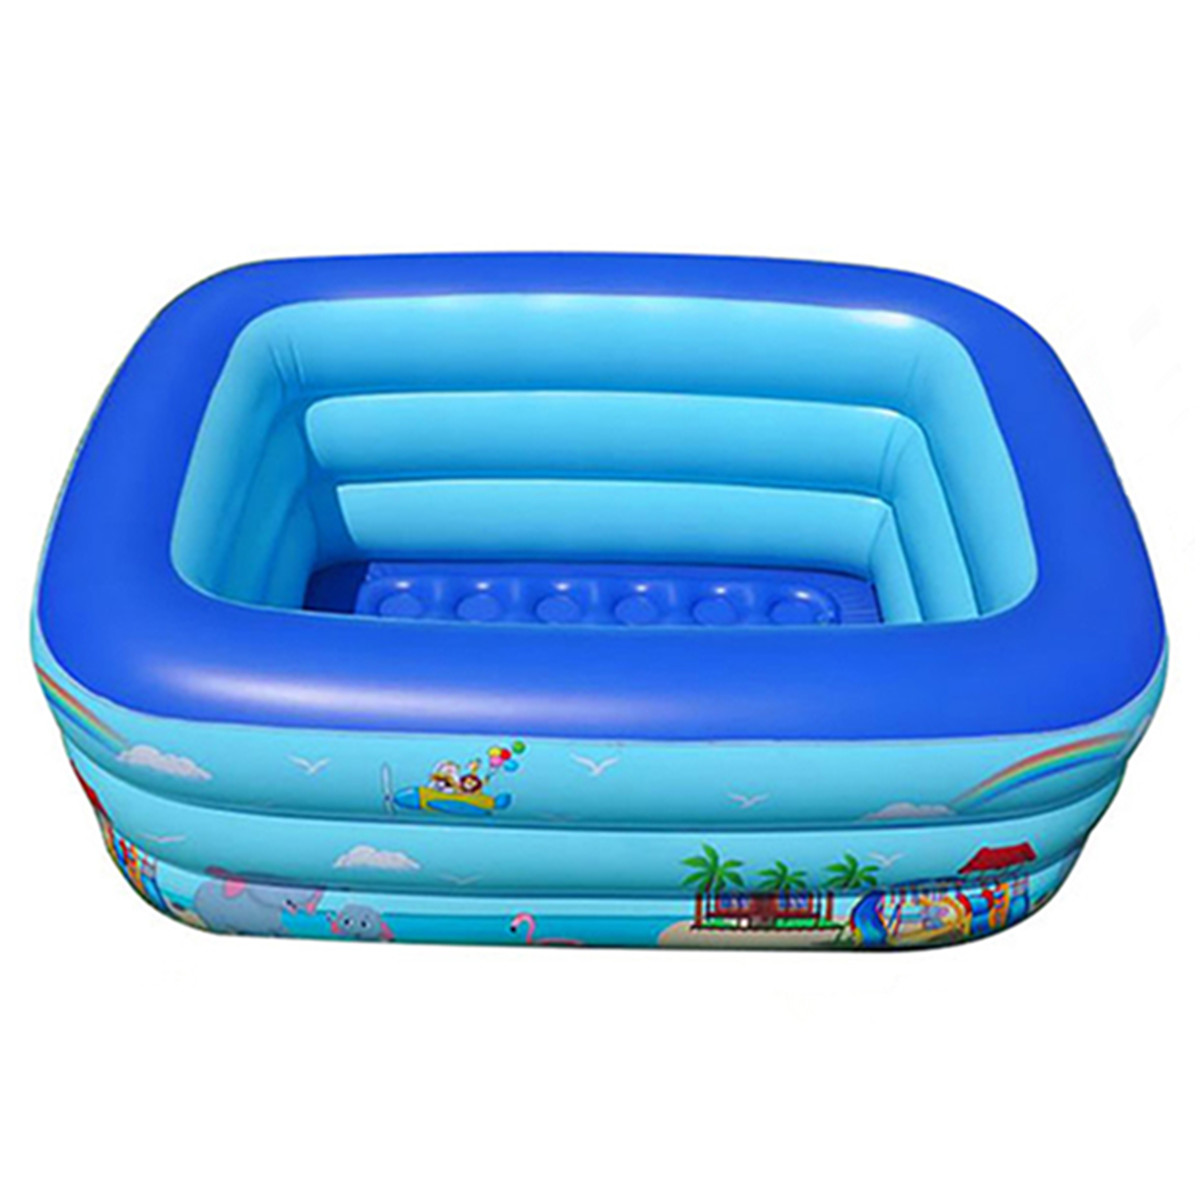 Thickened-PVC-Inflatable-Swimming-Pool-Childrens-Swimming-Pool-Bath-Tub-Outdoor-Indoor-Play-Pool-Chi-1856509-16